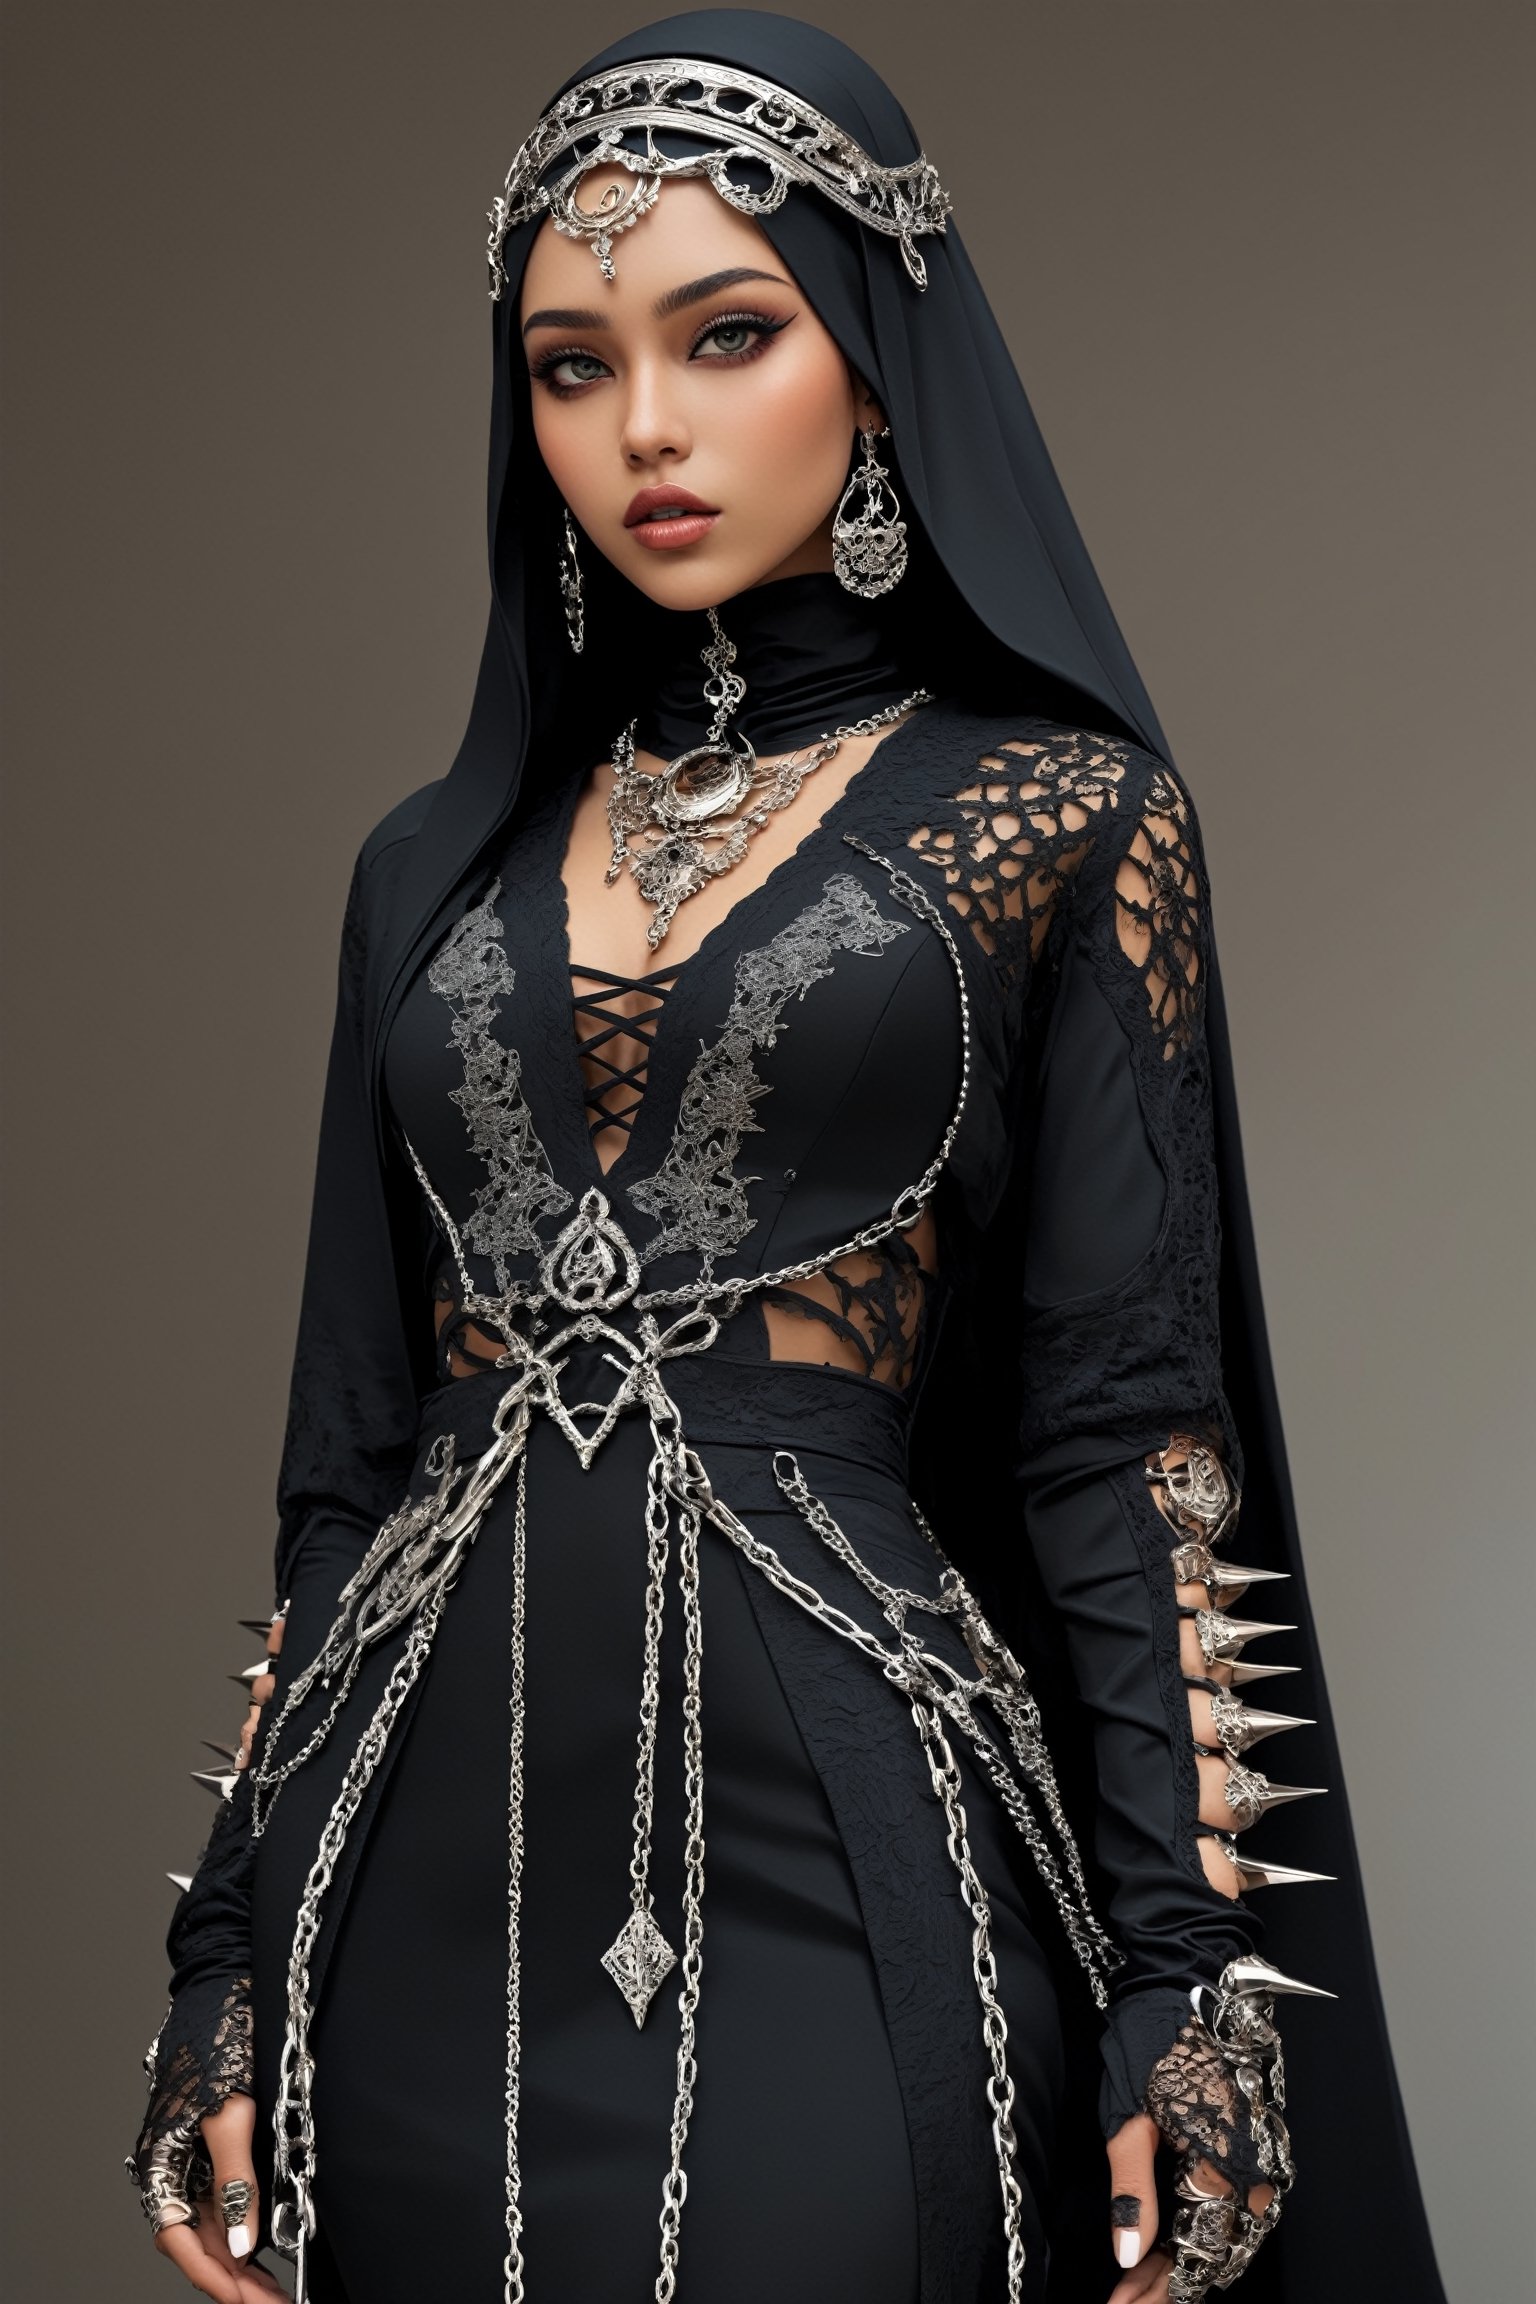 extreme realistic,1  woman,Beautiful middle eastern woman,adorned in a striking fusion of traditional Islamic ethnic attire and edgy Gothic punk fashion. Envision her wearing a sleek, floor-length abaya embellished with intricate lace patterns and adorned with chains and studs, giving it a modern and rebellious twist. Picture her hijab transformed into a statement piece, featuring bold prints or dark, dramatic colors, accented with metal spikes or safety pins. Imagine her accessorizing with chunky leather boots, fingerless gloves, and layered chains, ,photo_b00ster,Mavelle